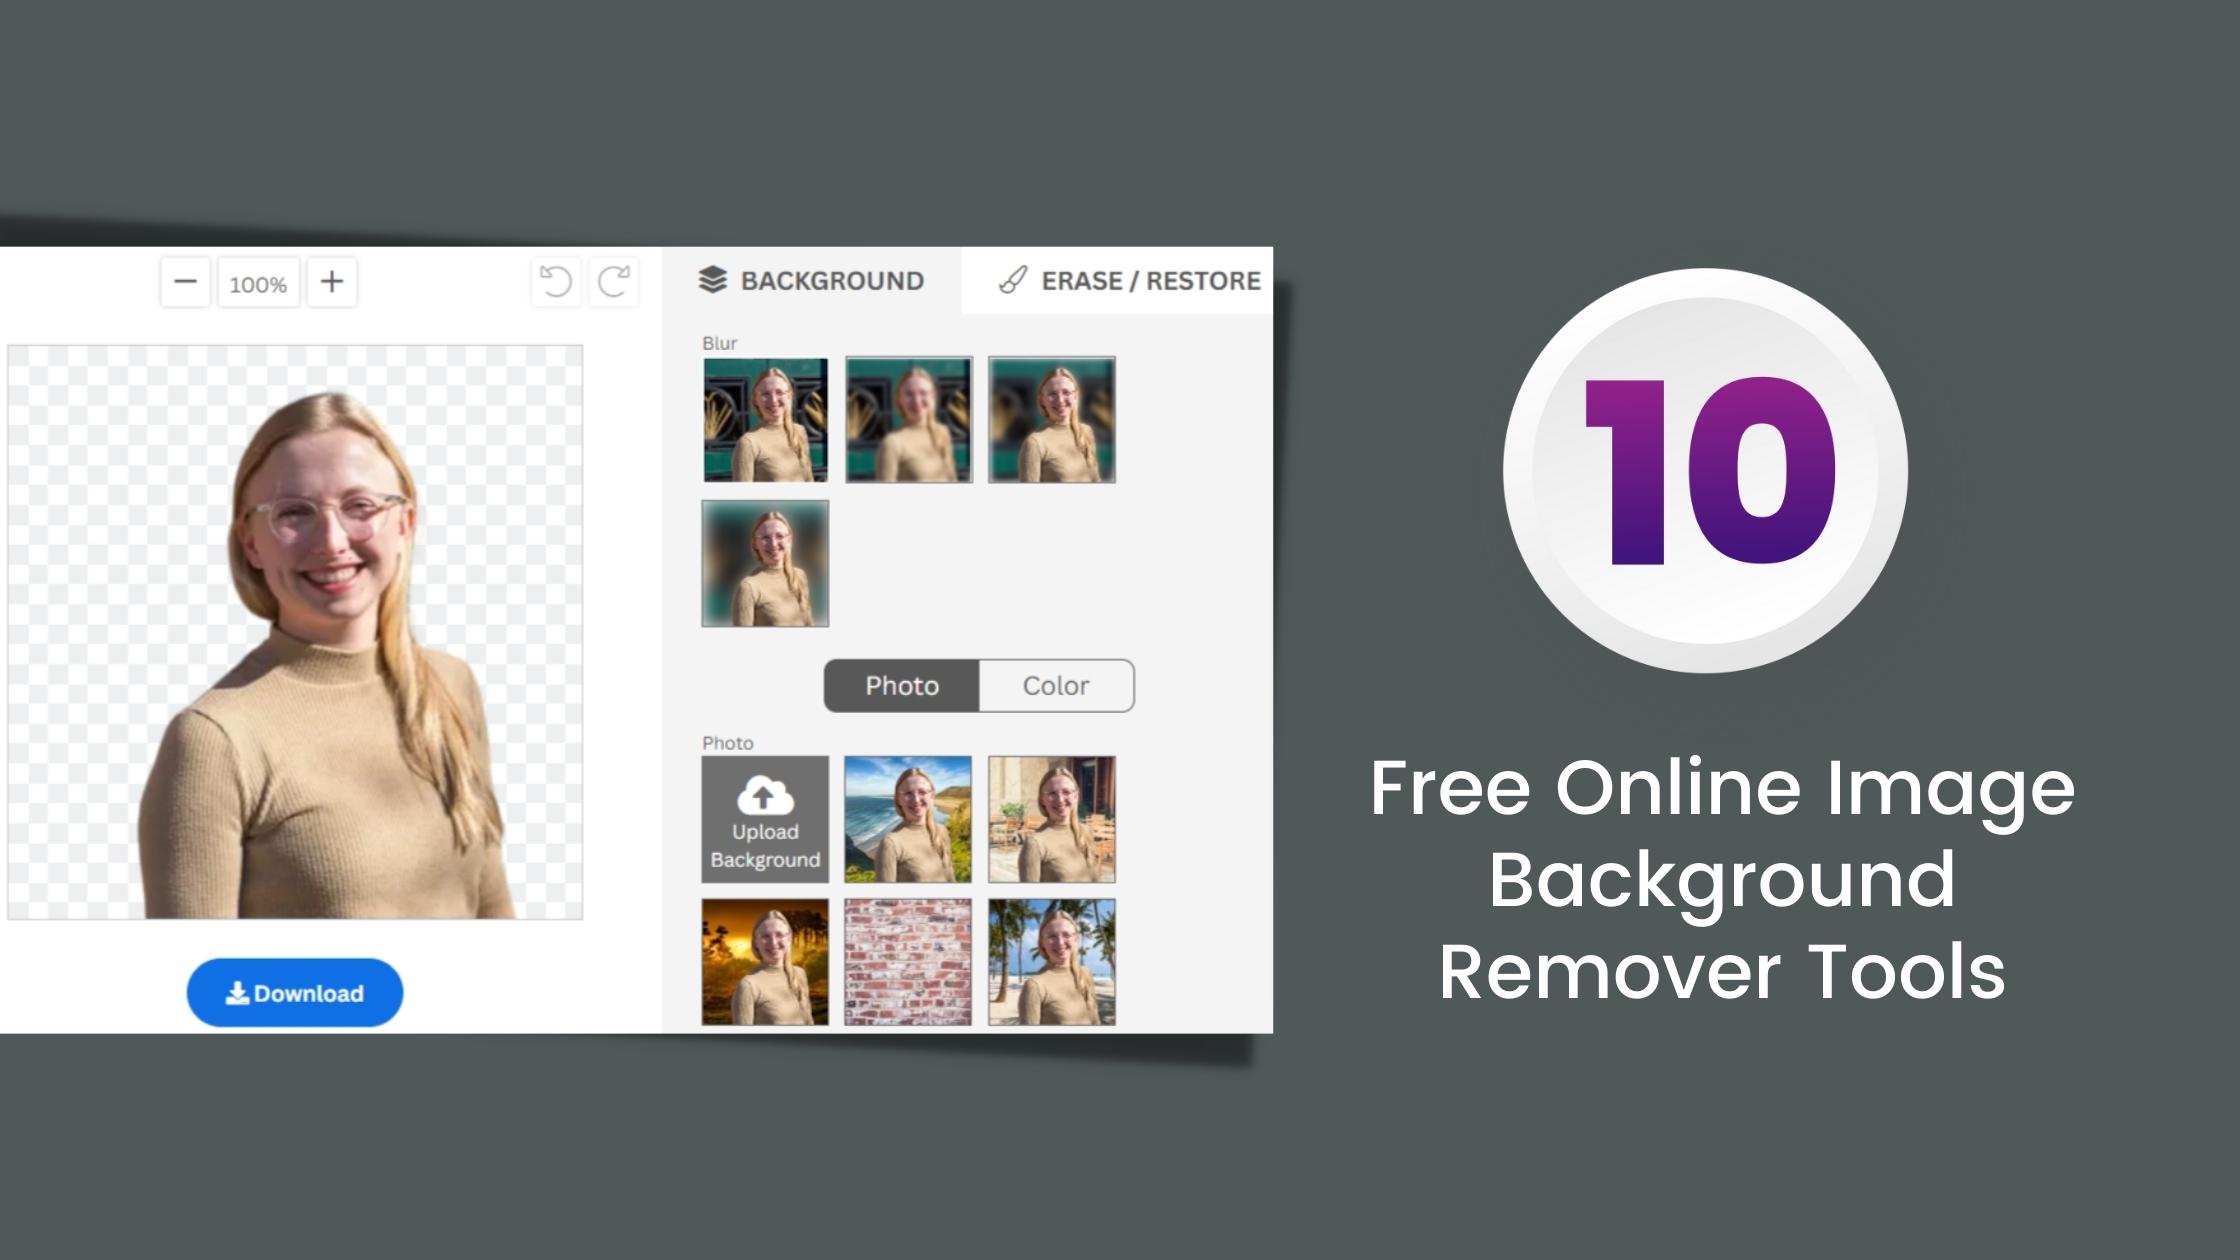 10 Free Online Image Background Remover Tools